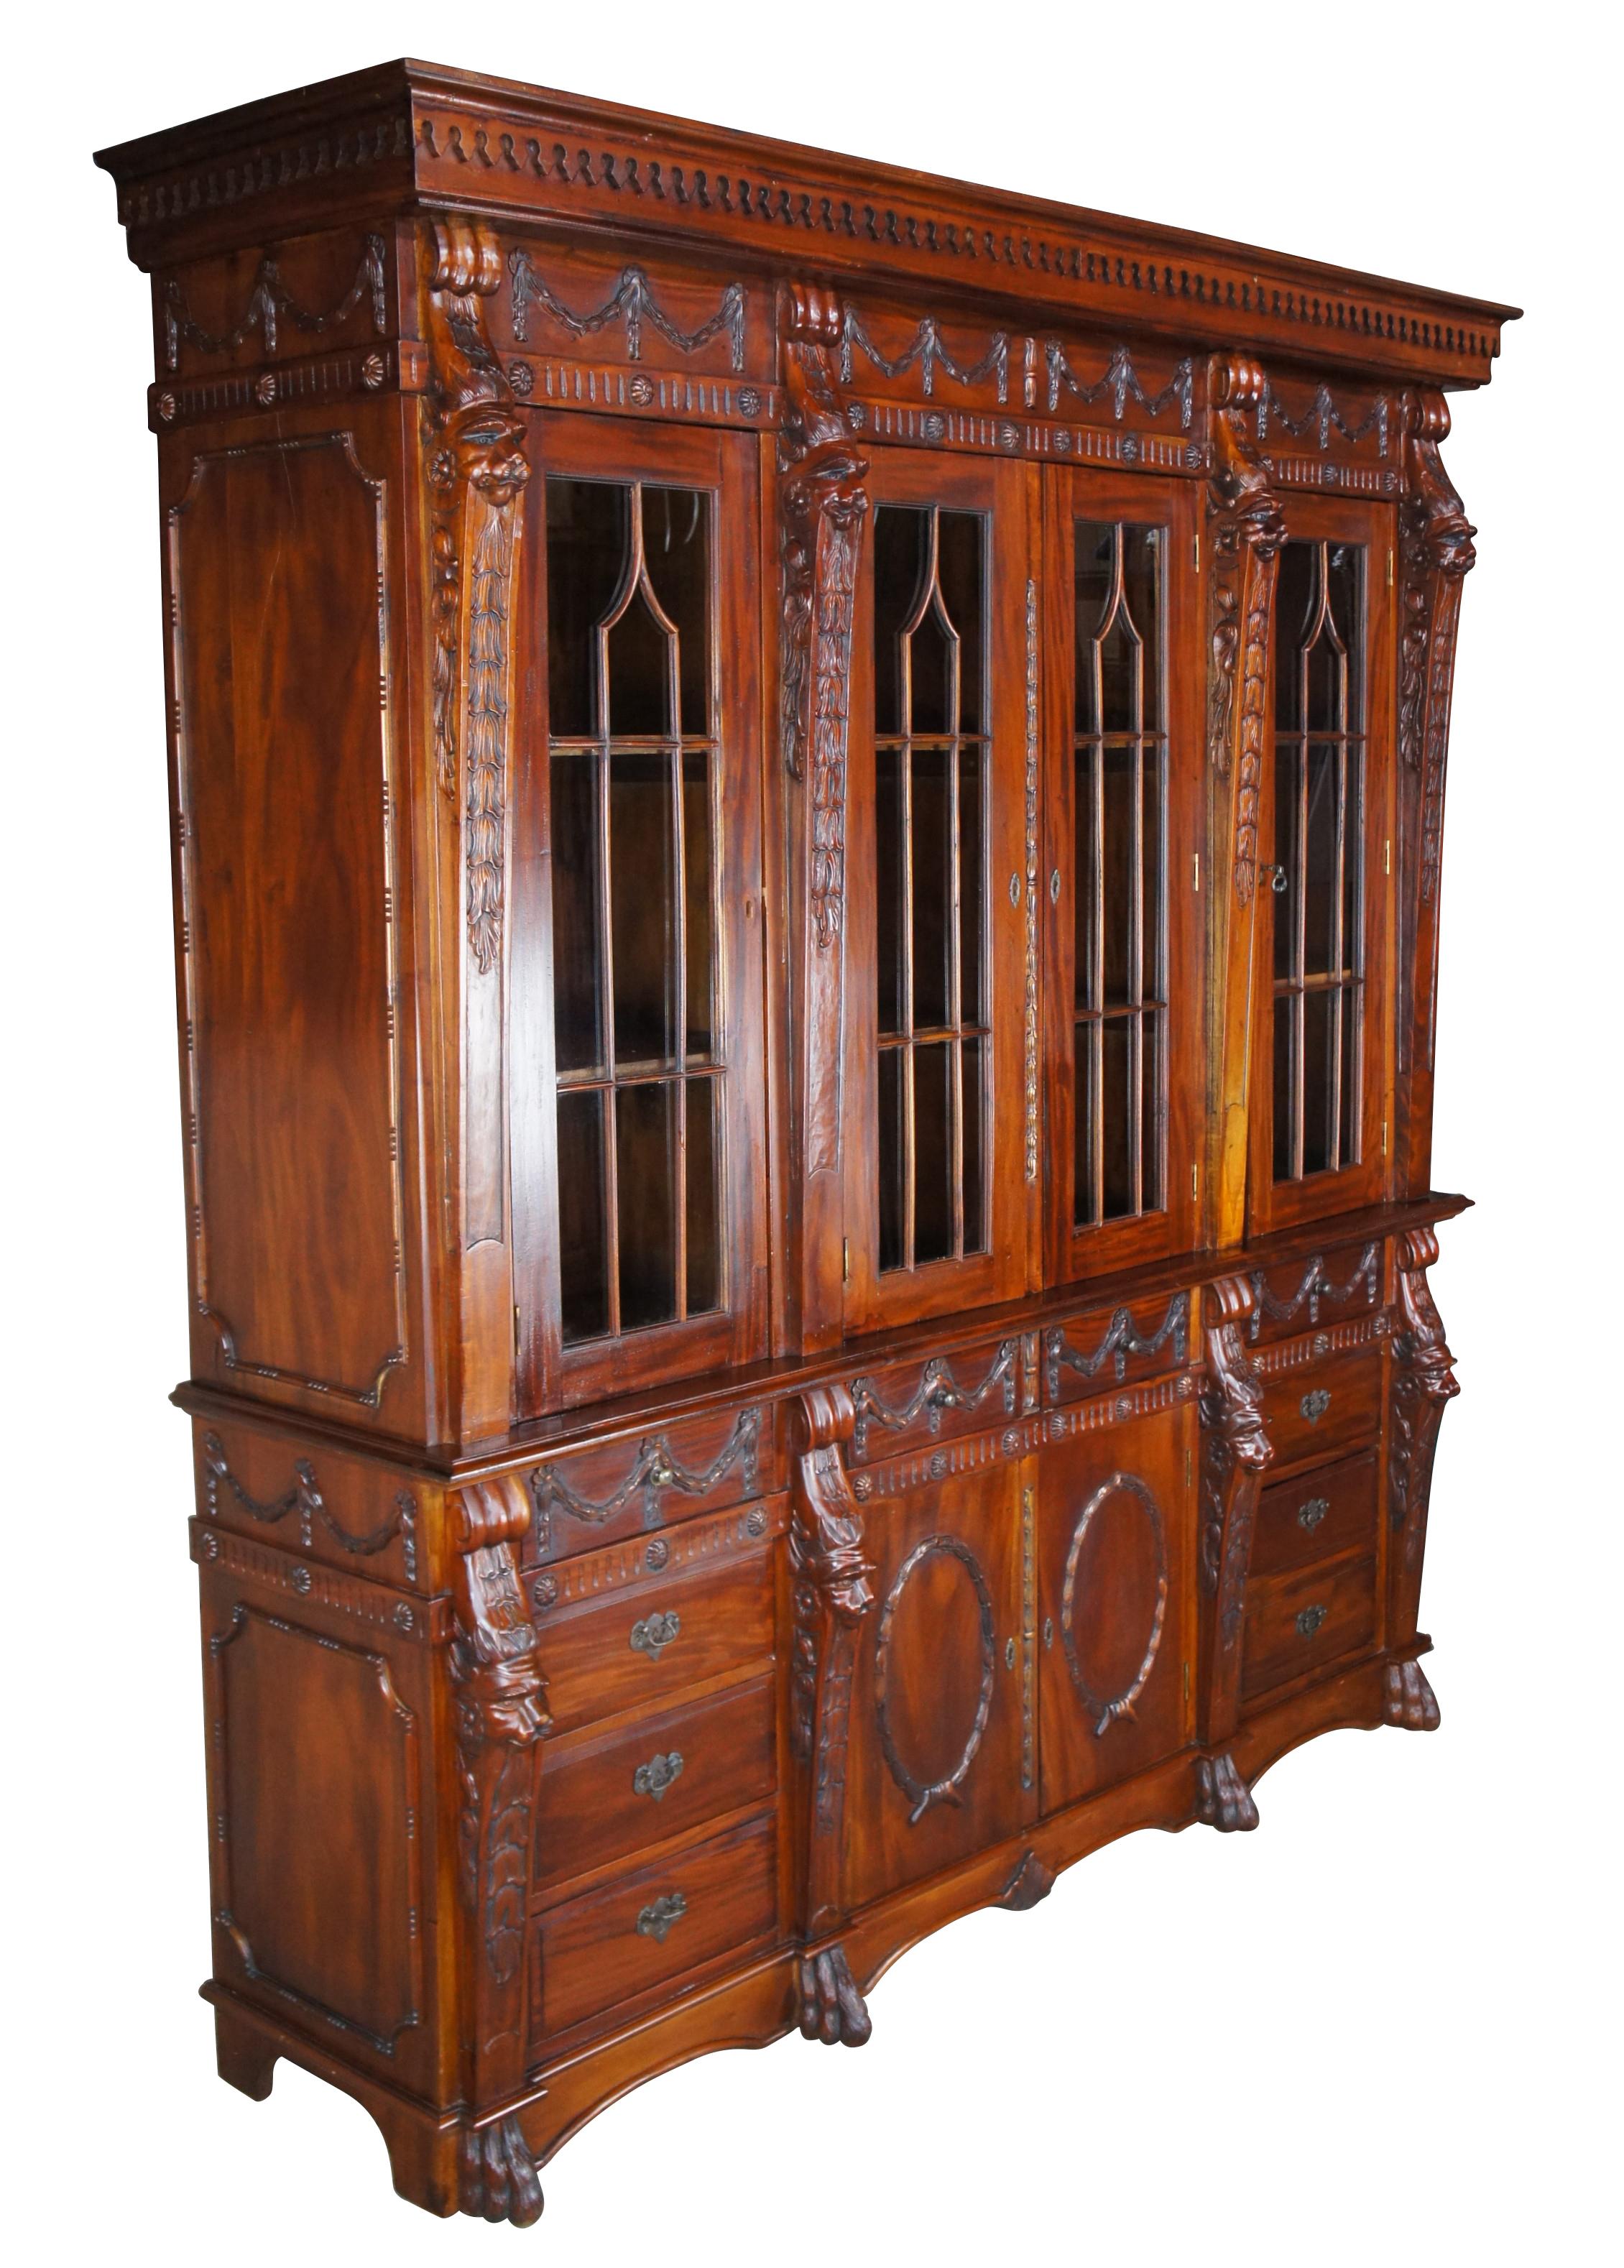 Vintage English Chippendale style solid mahogany carved china cabinet or cupboard.  Drawing inspiration from Neoclassicism and Empire design.  Made of mahogany featuring carved accents with sawtooth crown over Gothic fretwork doors divided by high